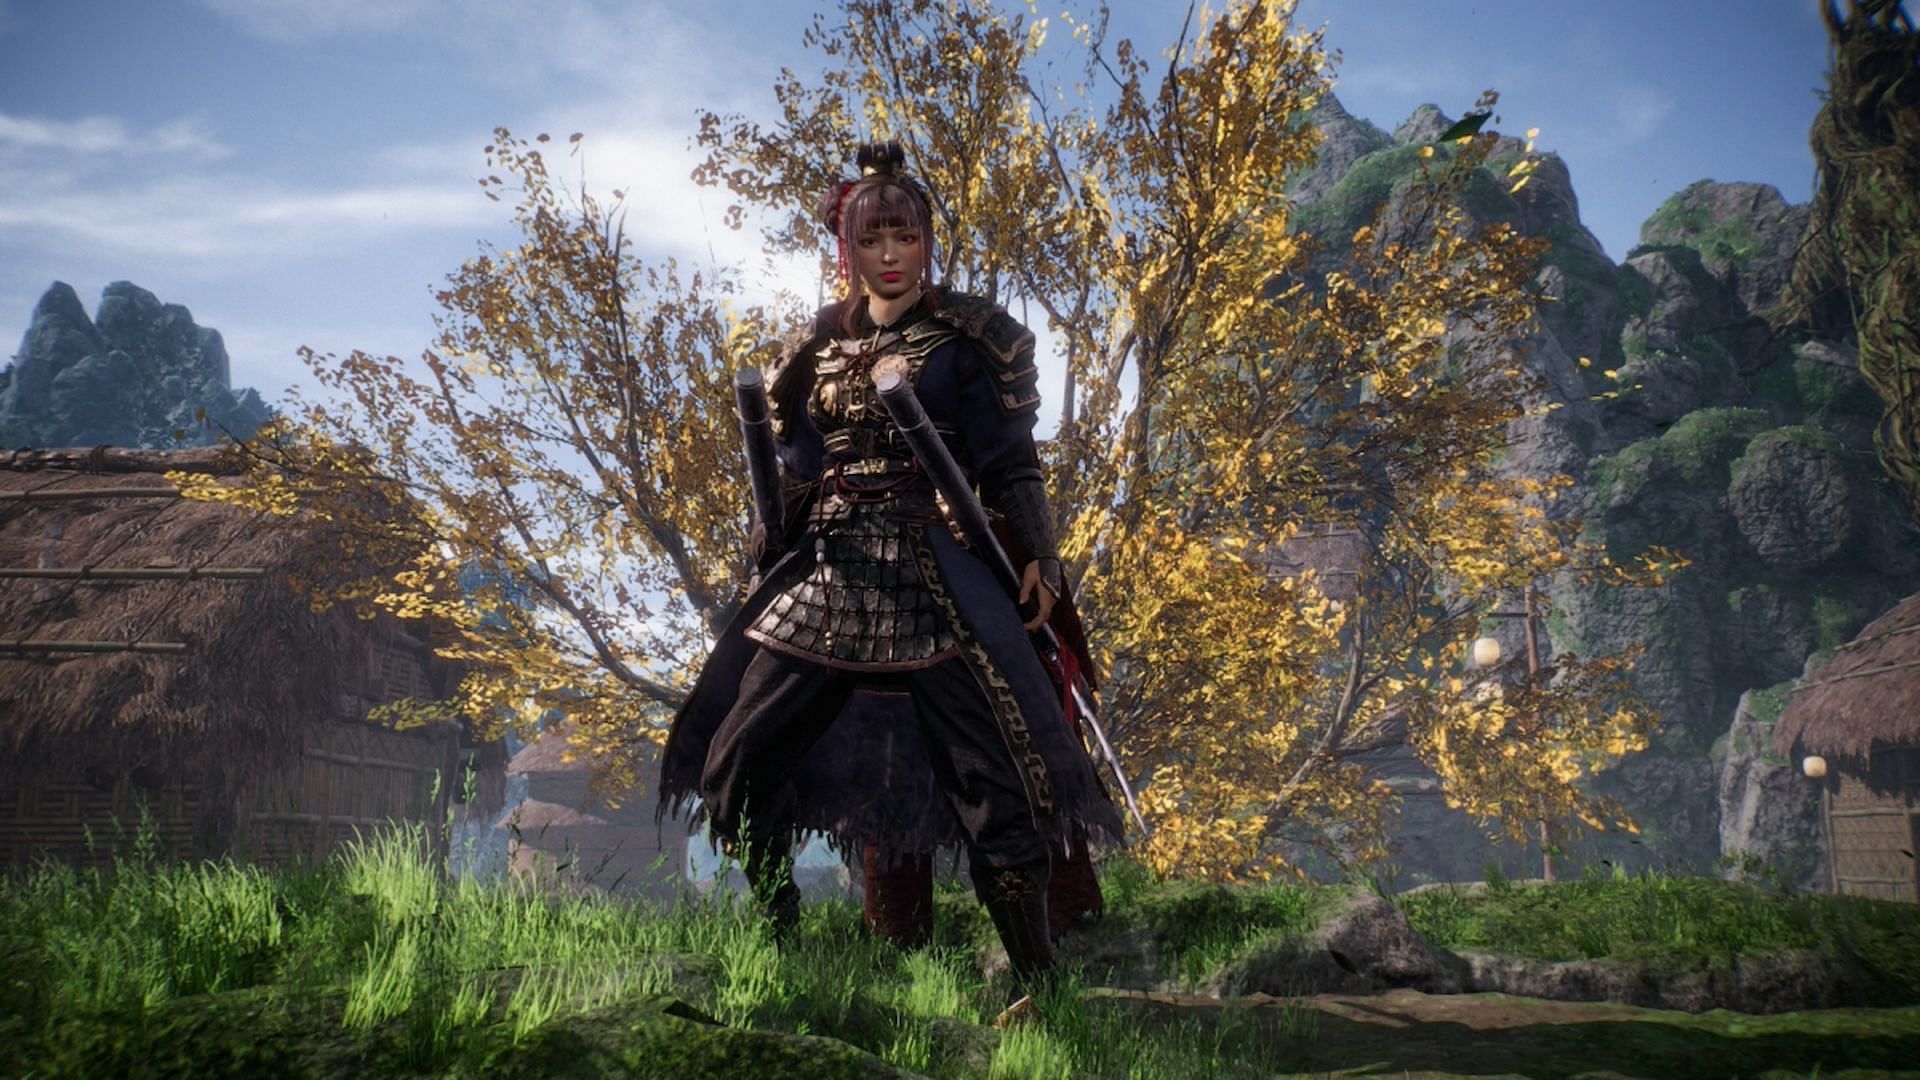 Boldness, Curse Star of Hejian and three other best Medium Armor sets in Wo Long: Fallen Dynasty (Image via Koei Tecmo)